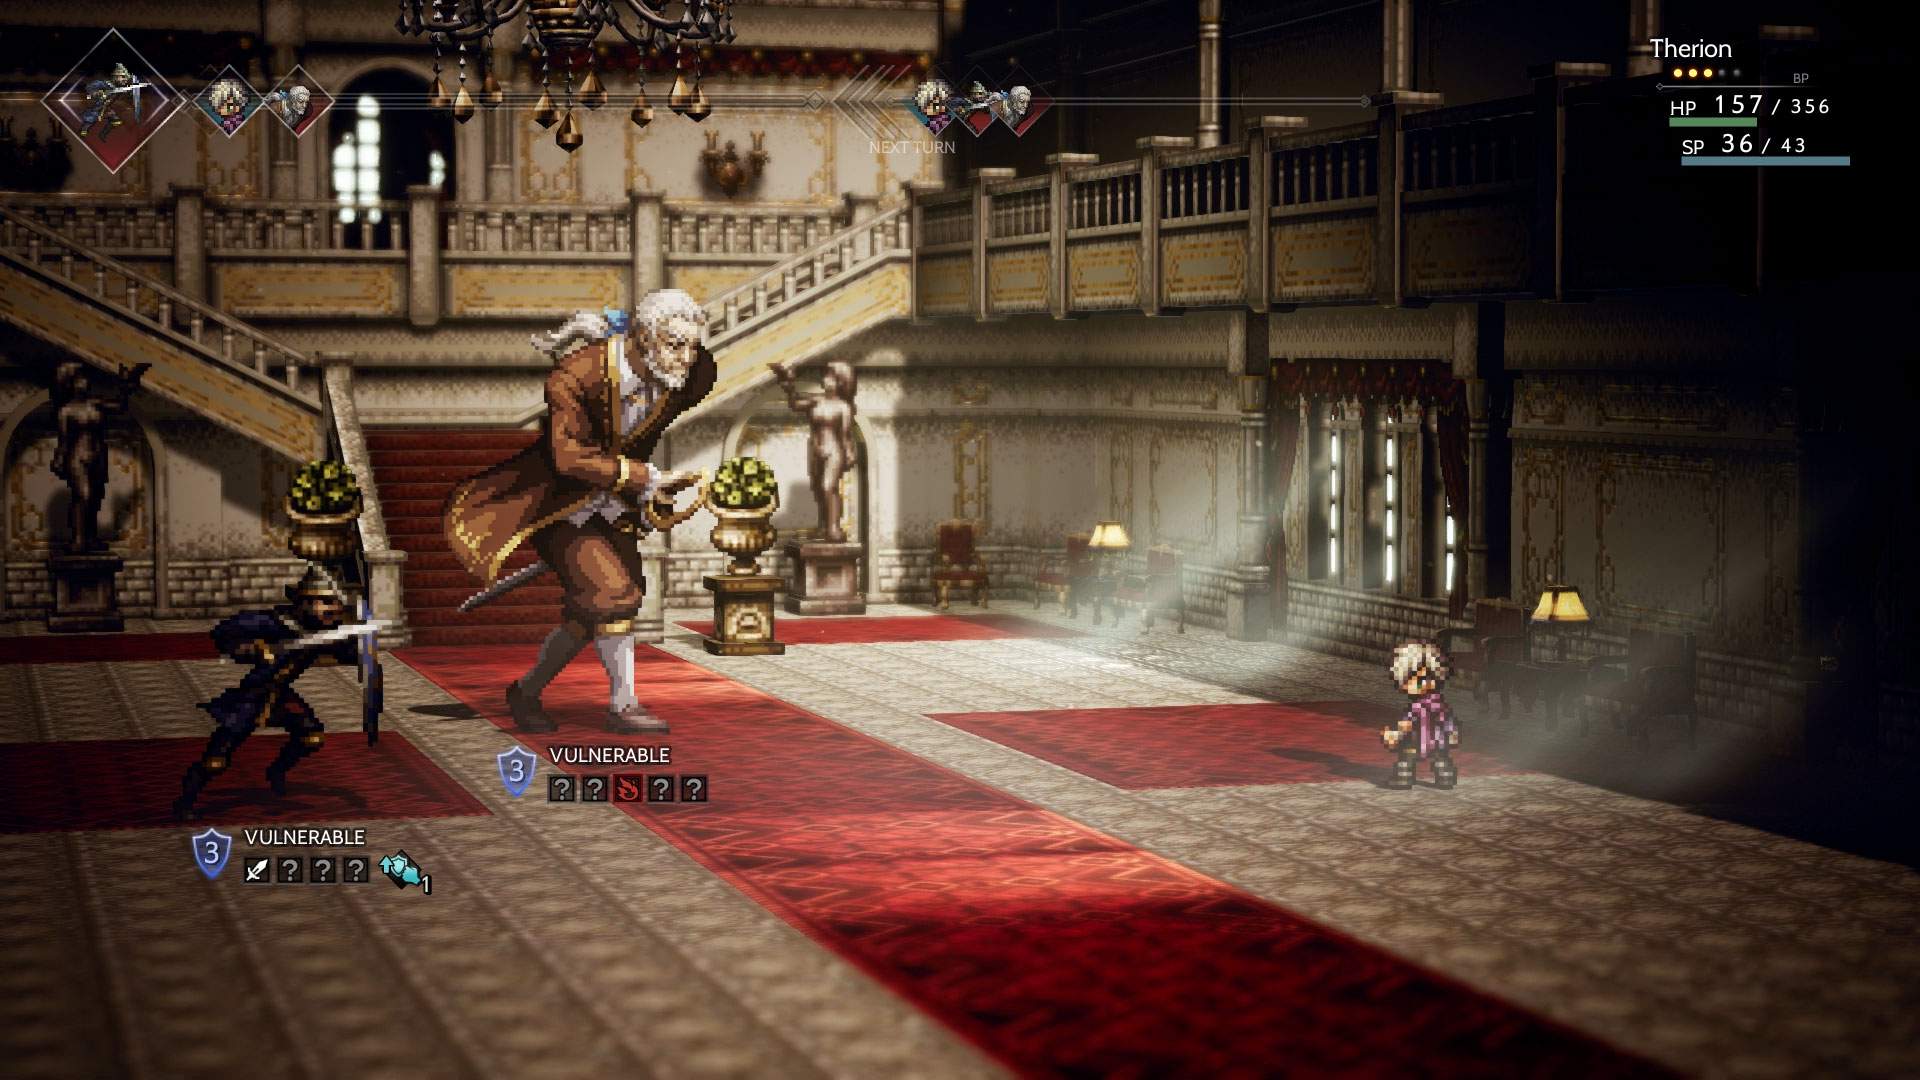 In game battle screenshot showing Therion in turn based battle against two enemies in a large manor